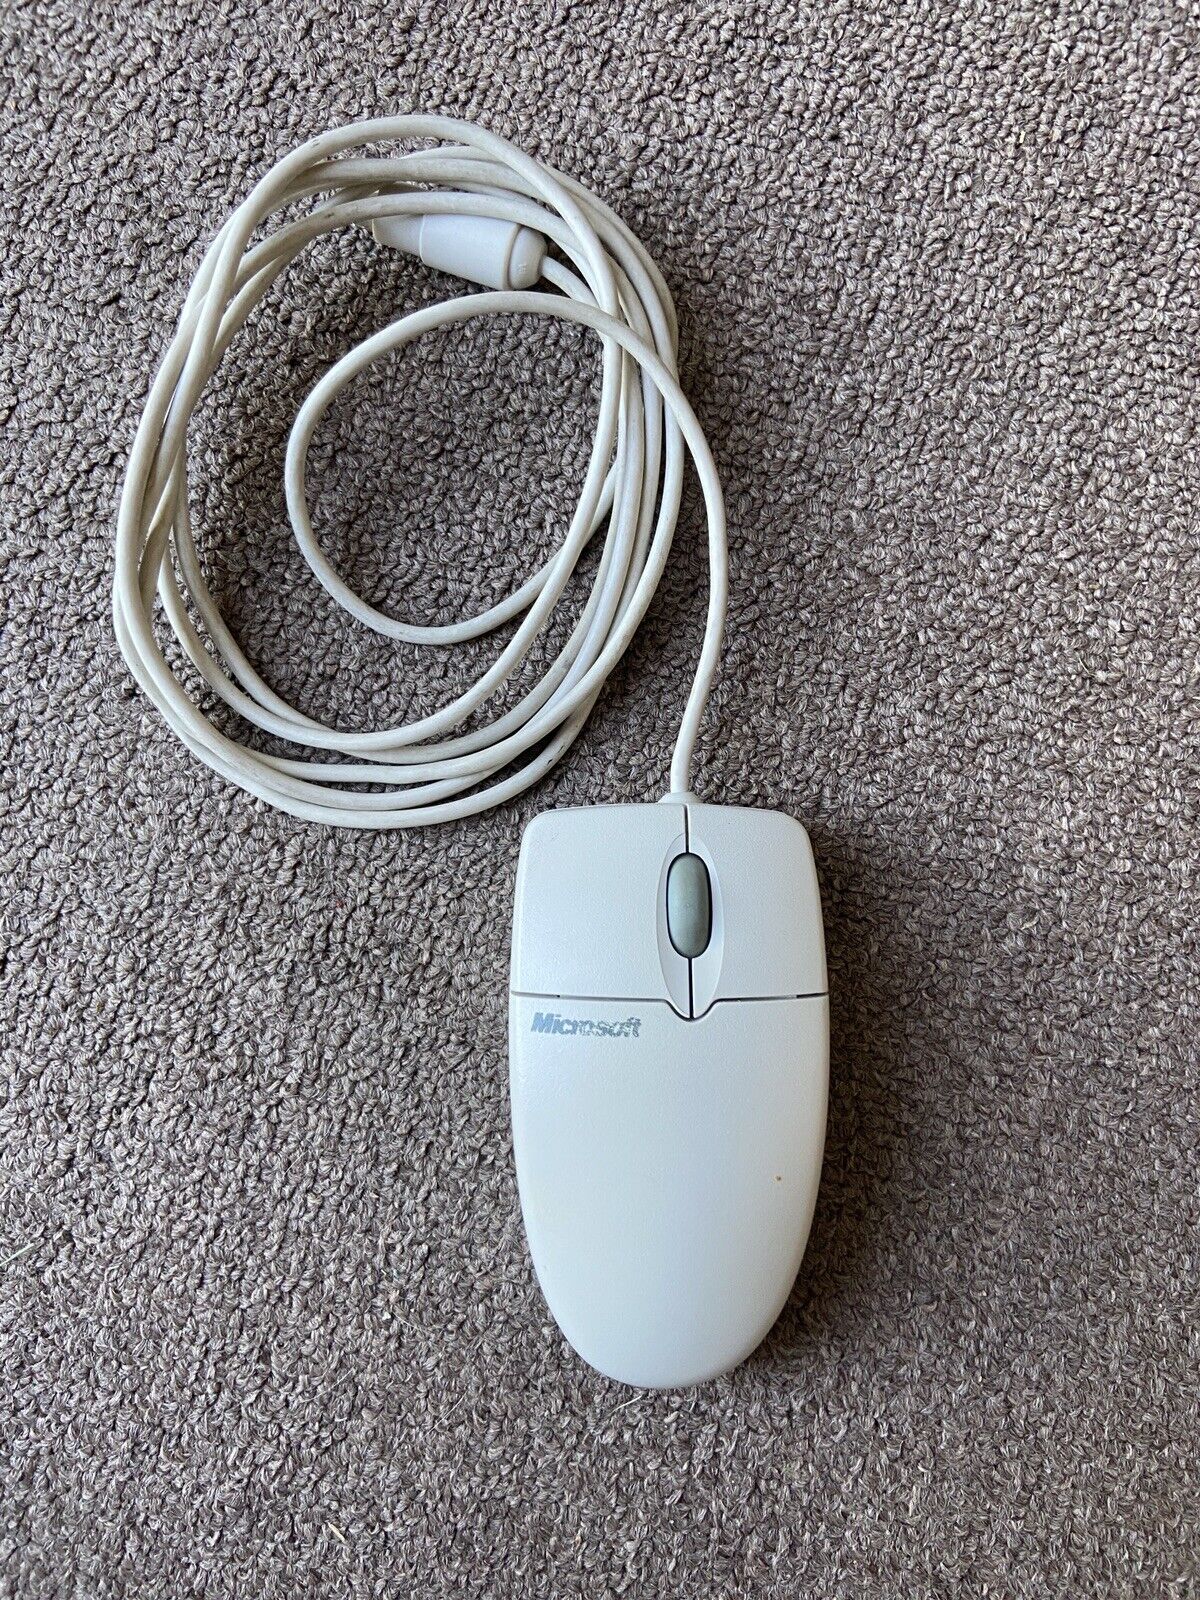 Vintage Microsoft Wheel Track Ball Mouse Serial PS/2 compatible X03-53717